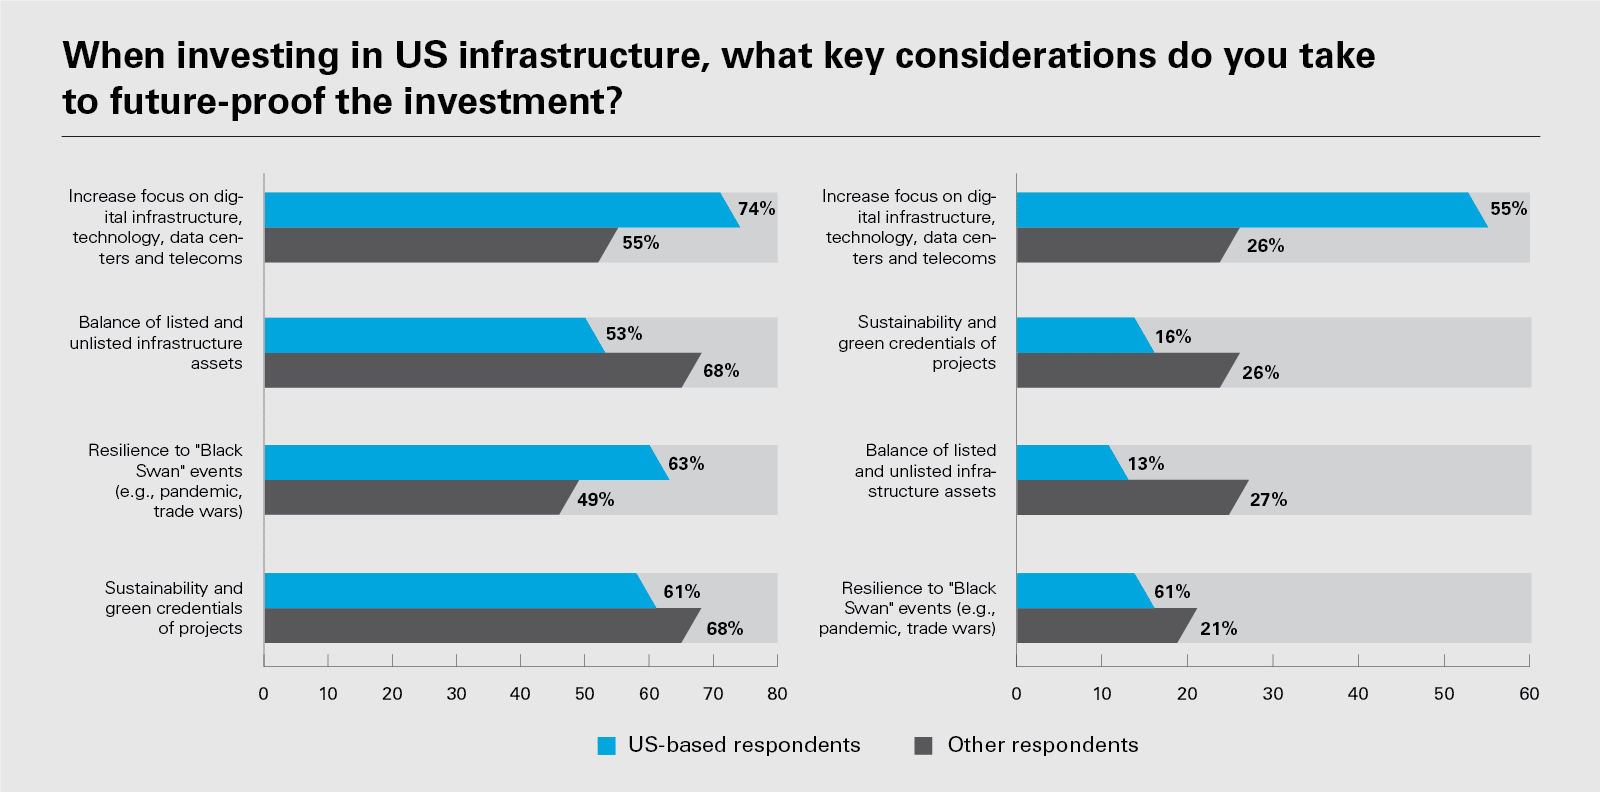 When investing in US infrastructure, what key considerations do you take to future-proof the investment?